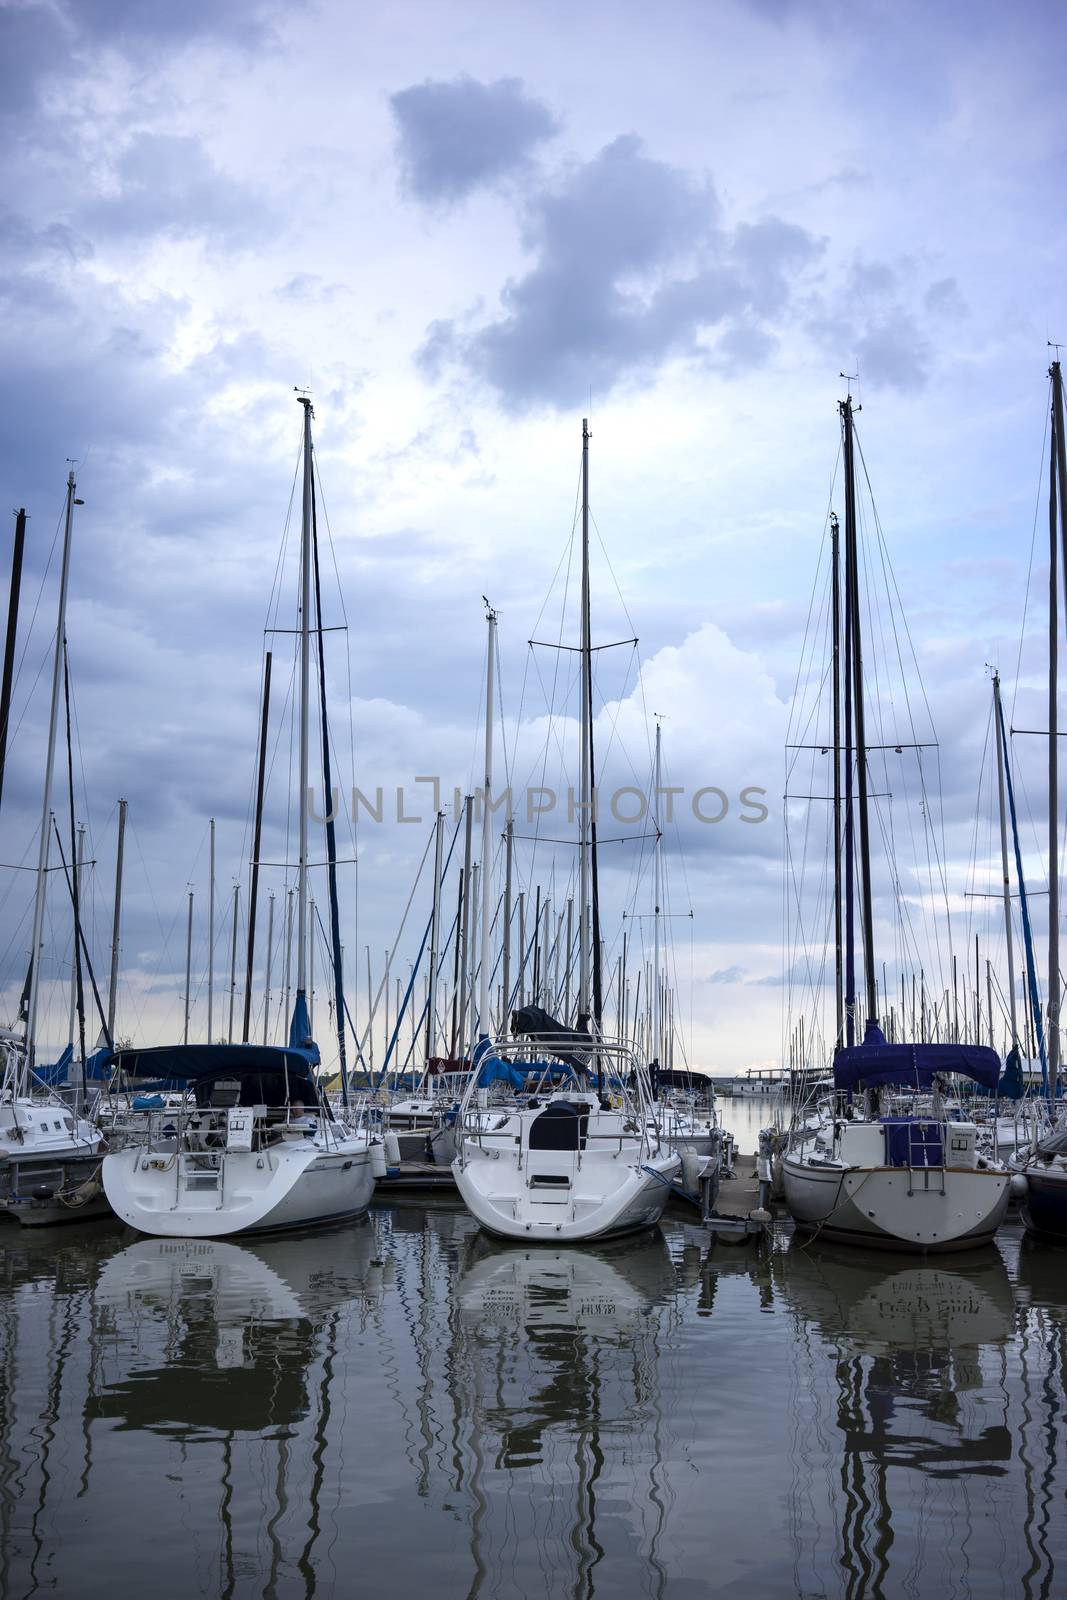 Storm Over Marina by leieng